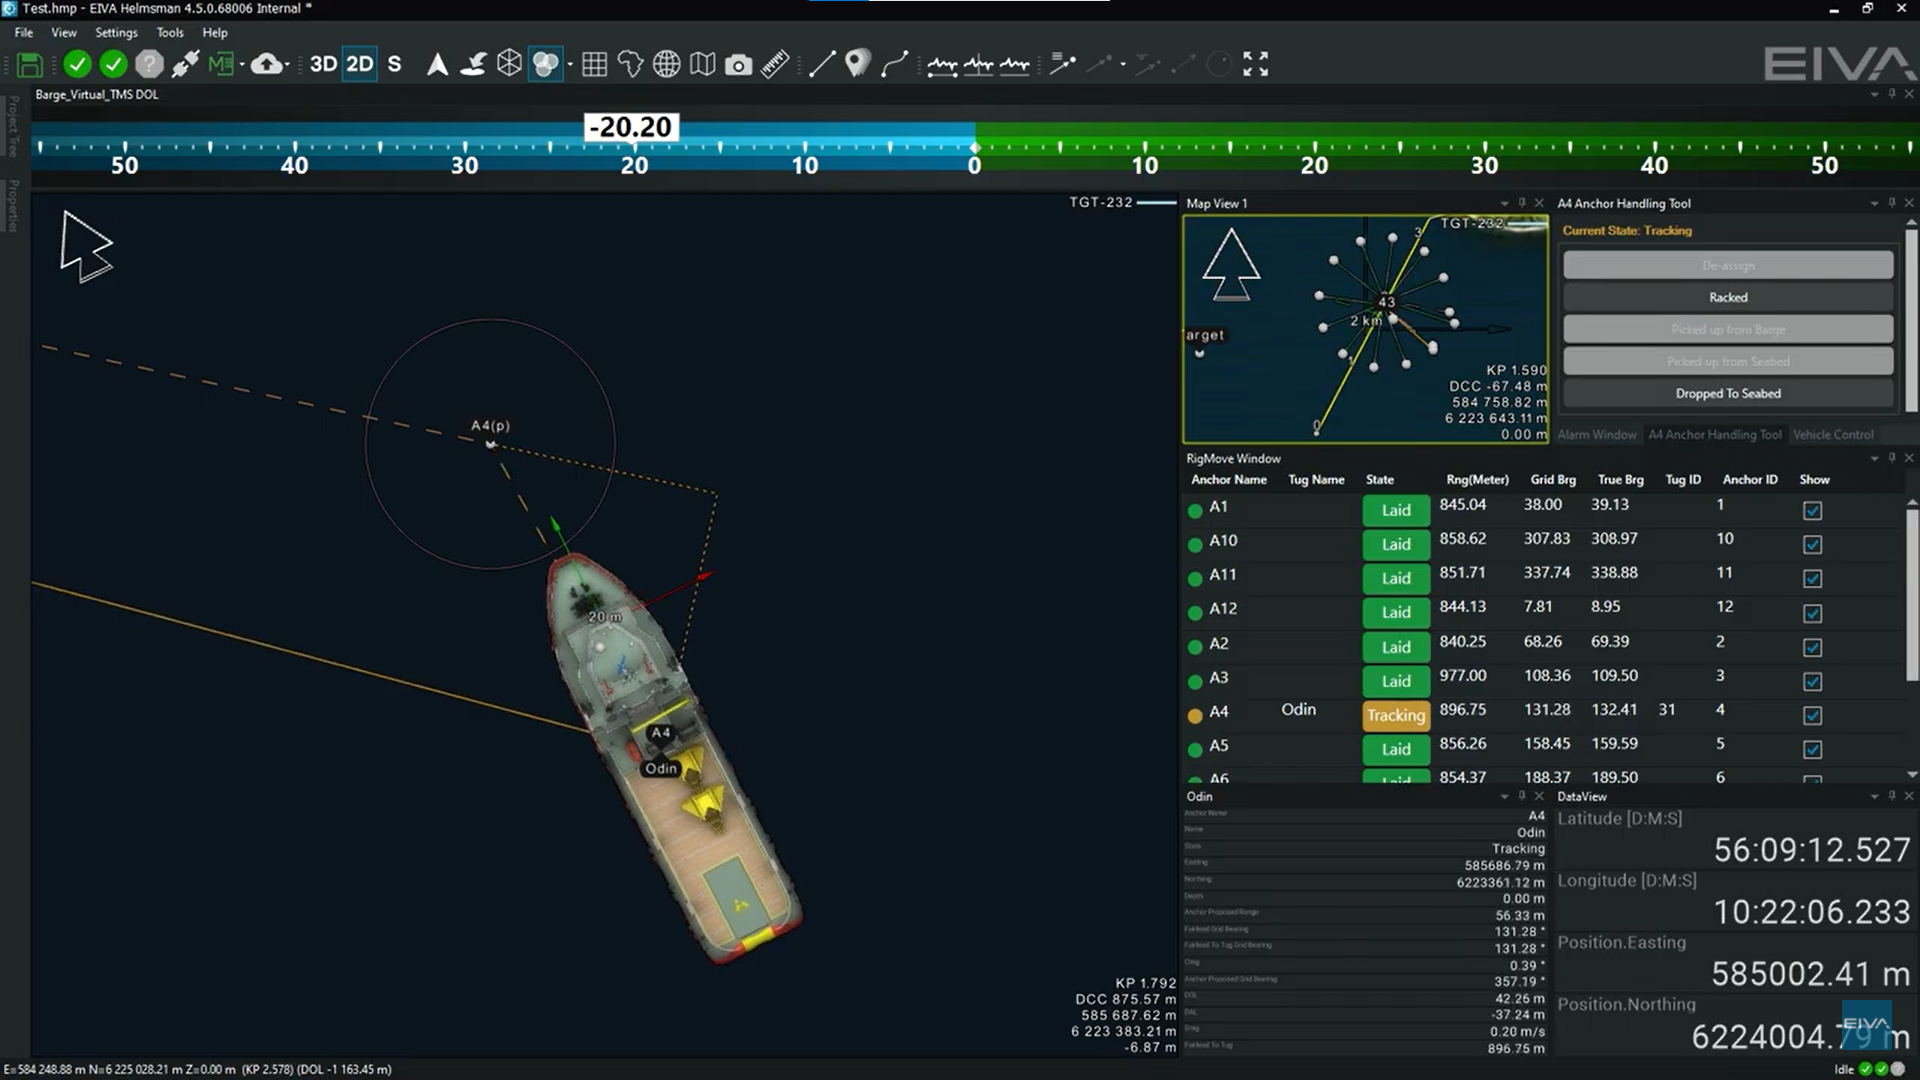 NaviPac 4.5 is the latest update to our positioning and navigation software, with new features such as rig move and tug management